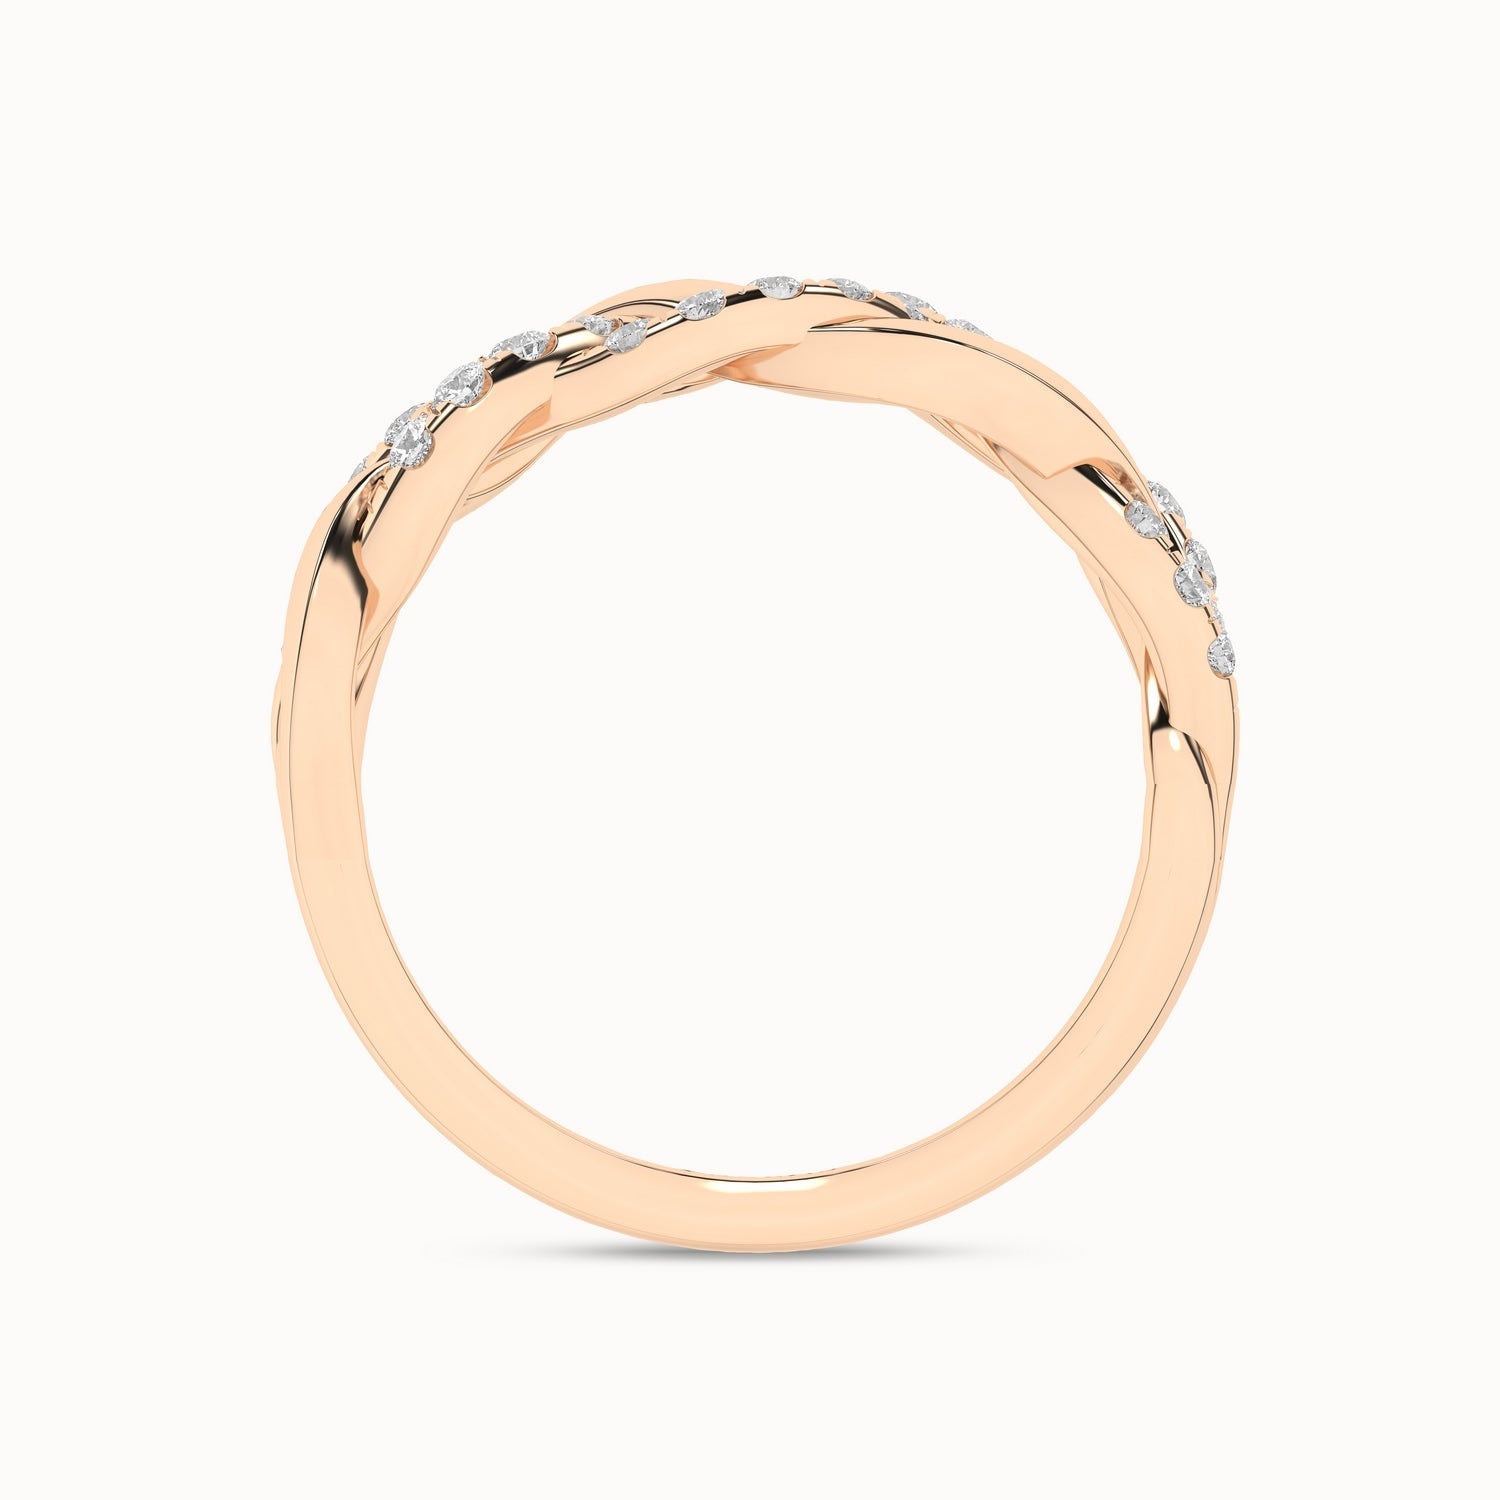 Triple Entwined Braid Ring_Product Angle_1/3Ct - 3